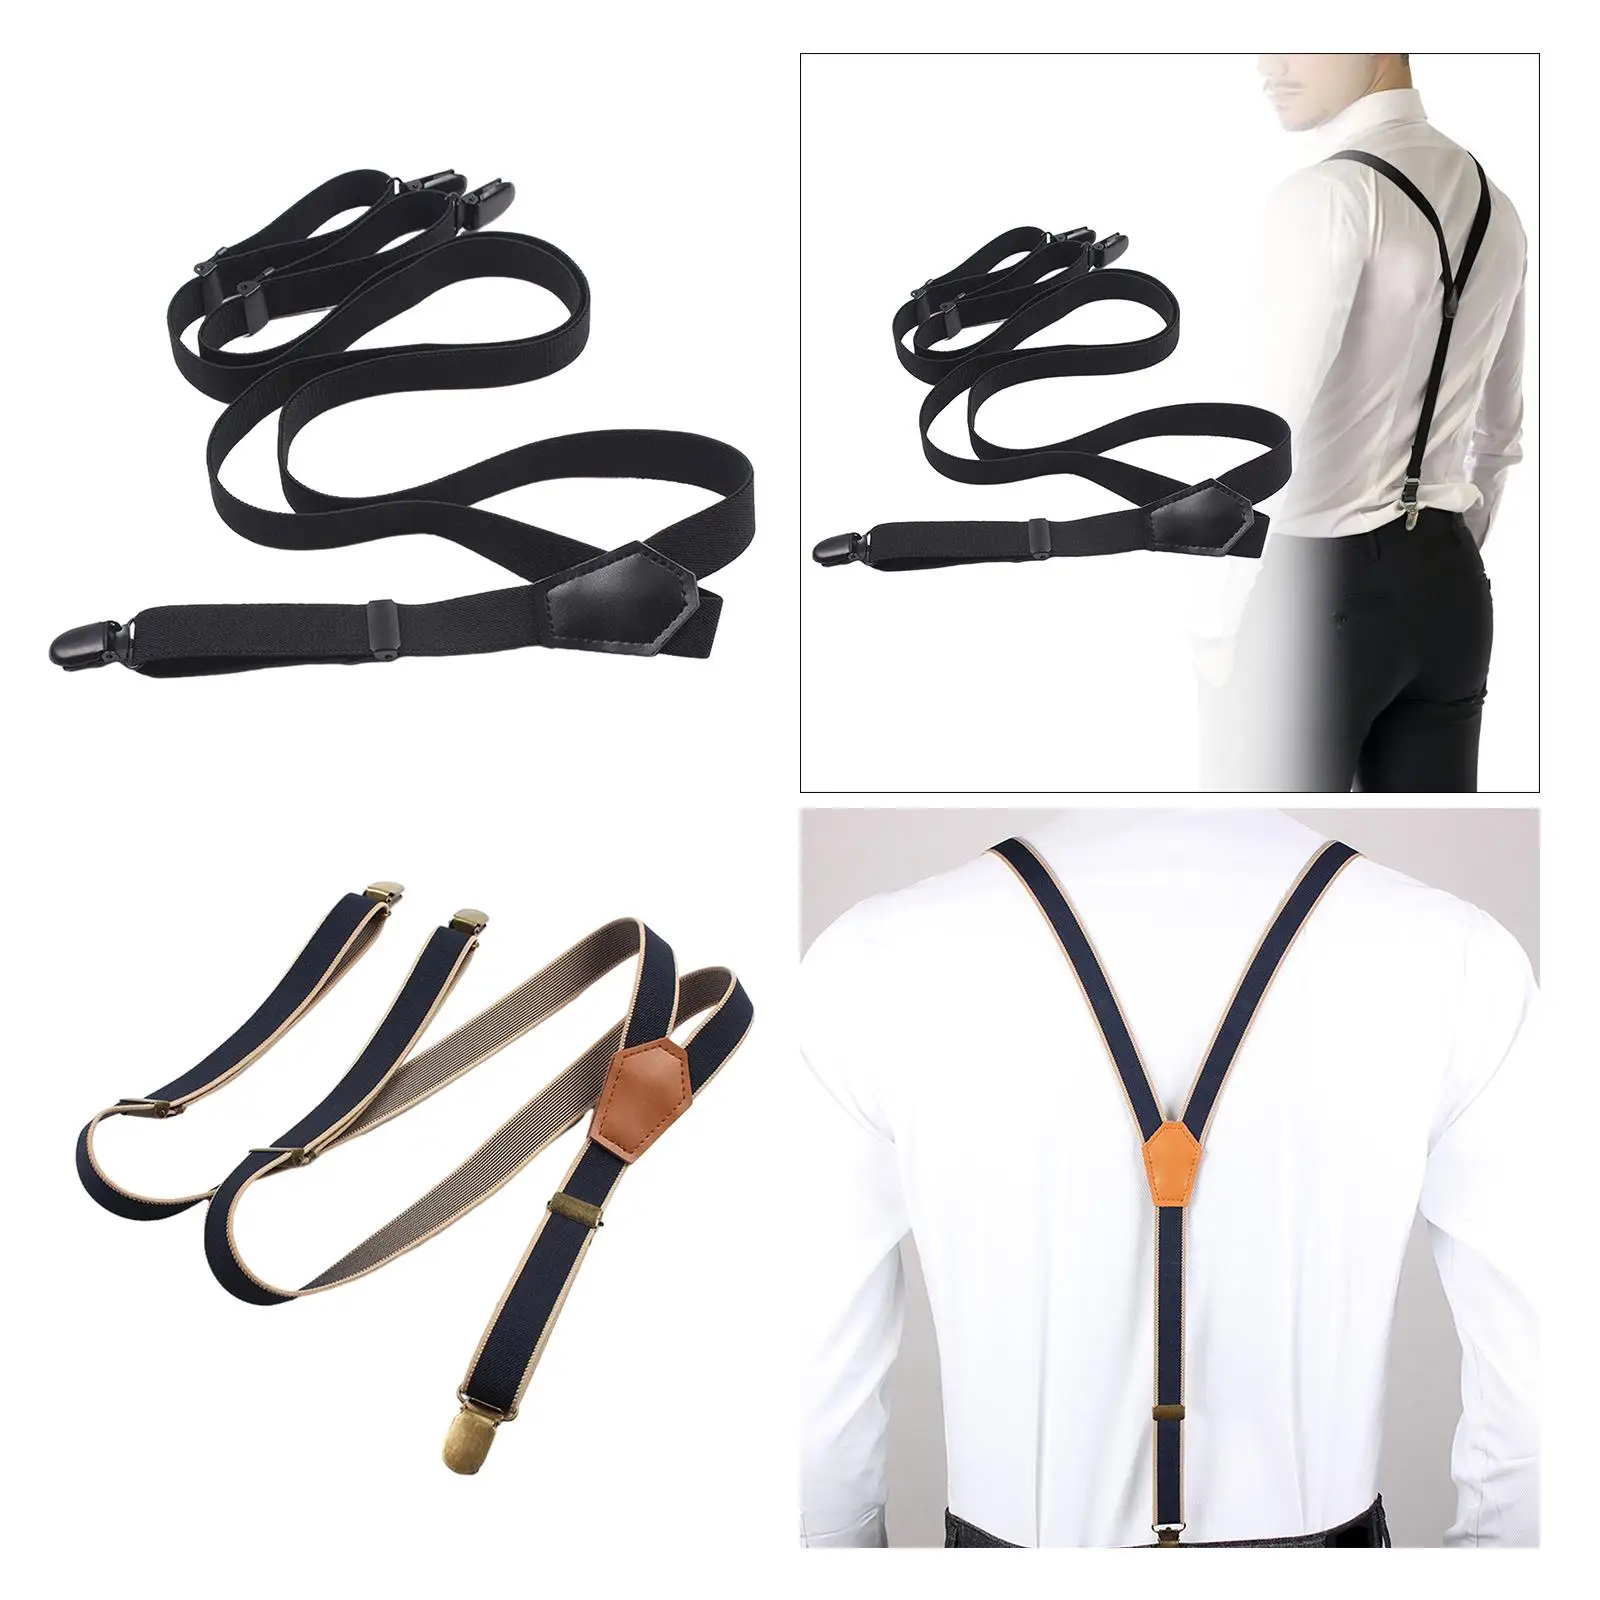 Suspenders for Men Vintage Style Heavy Duty Elastic with 3 Hook Clips for Formal Events Costume Party Business Wedding Pants